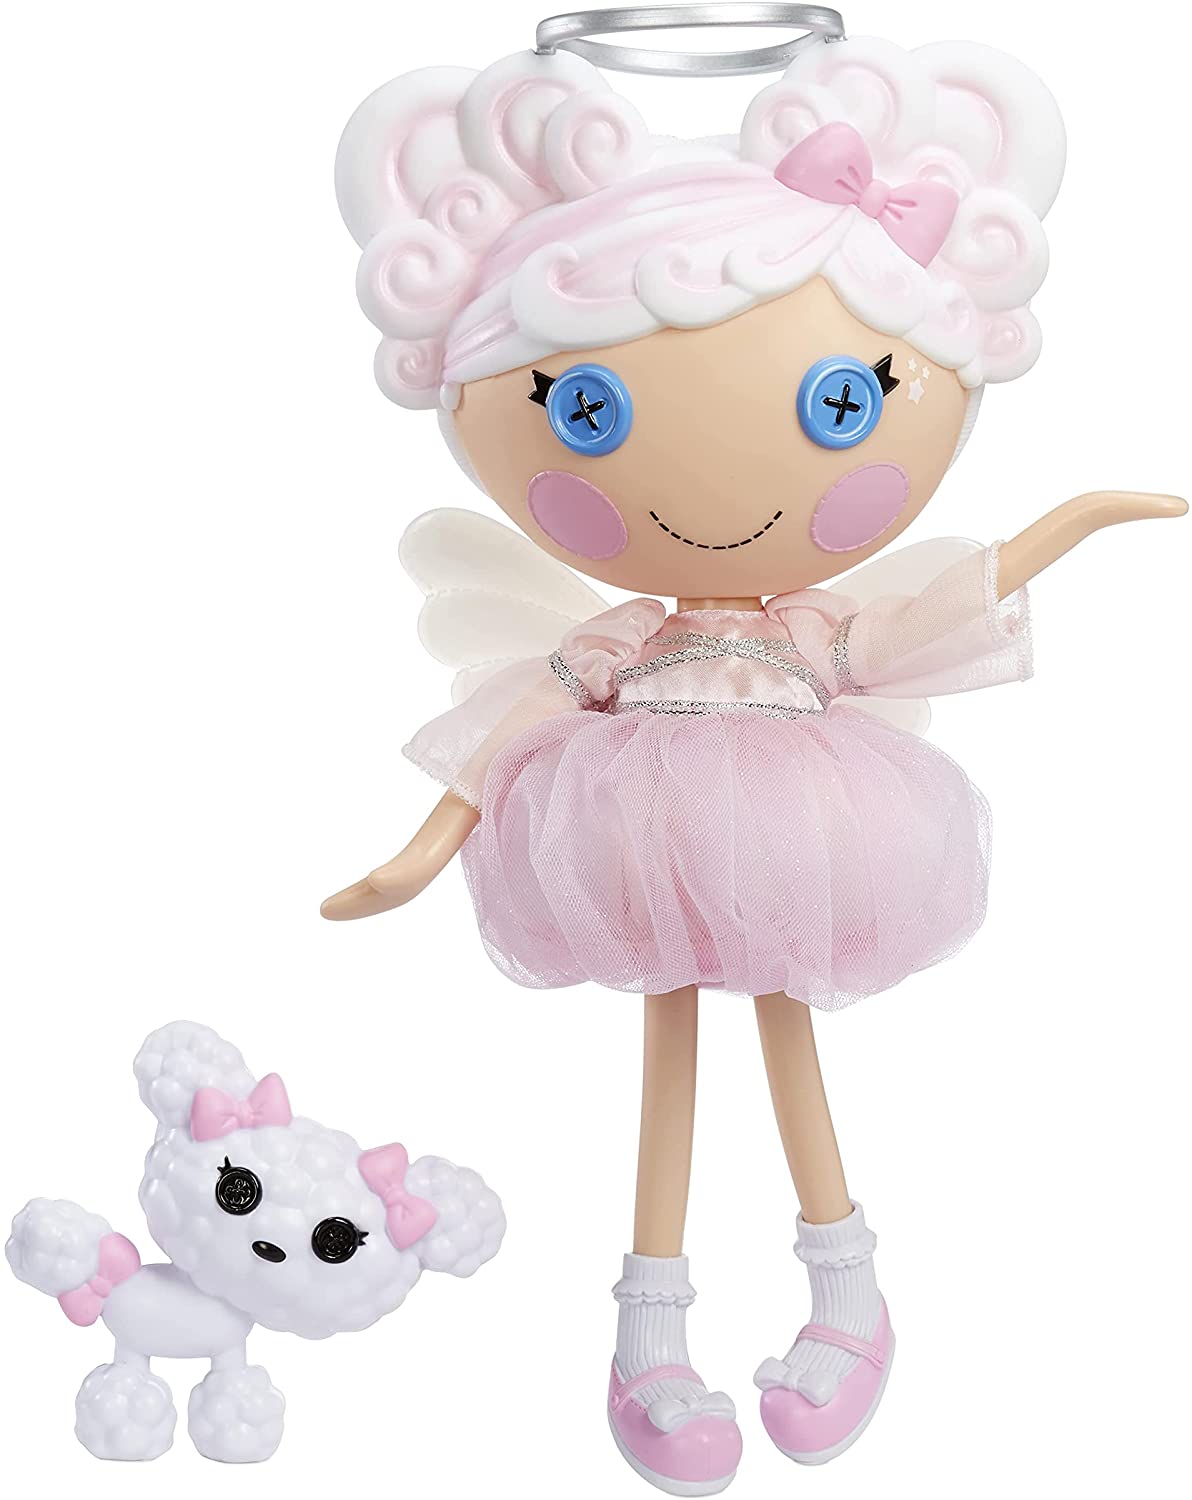 Lalaloopsy Cloud E. Sky 13" Doll & Pet Poodle, Angel Doll with White Hair $11.58 + free shipping w/ Prime or on $25+